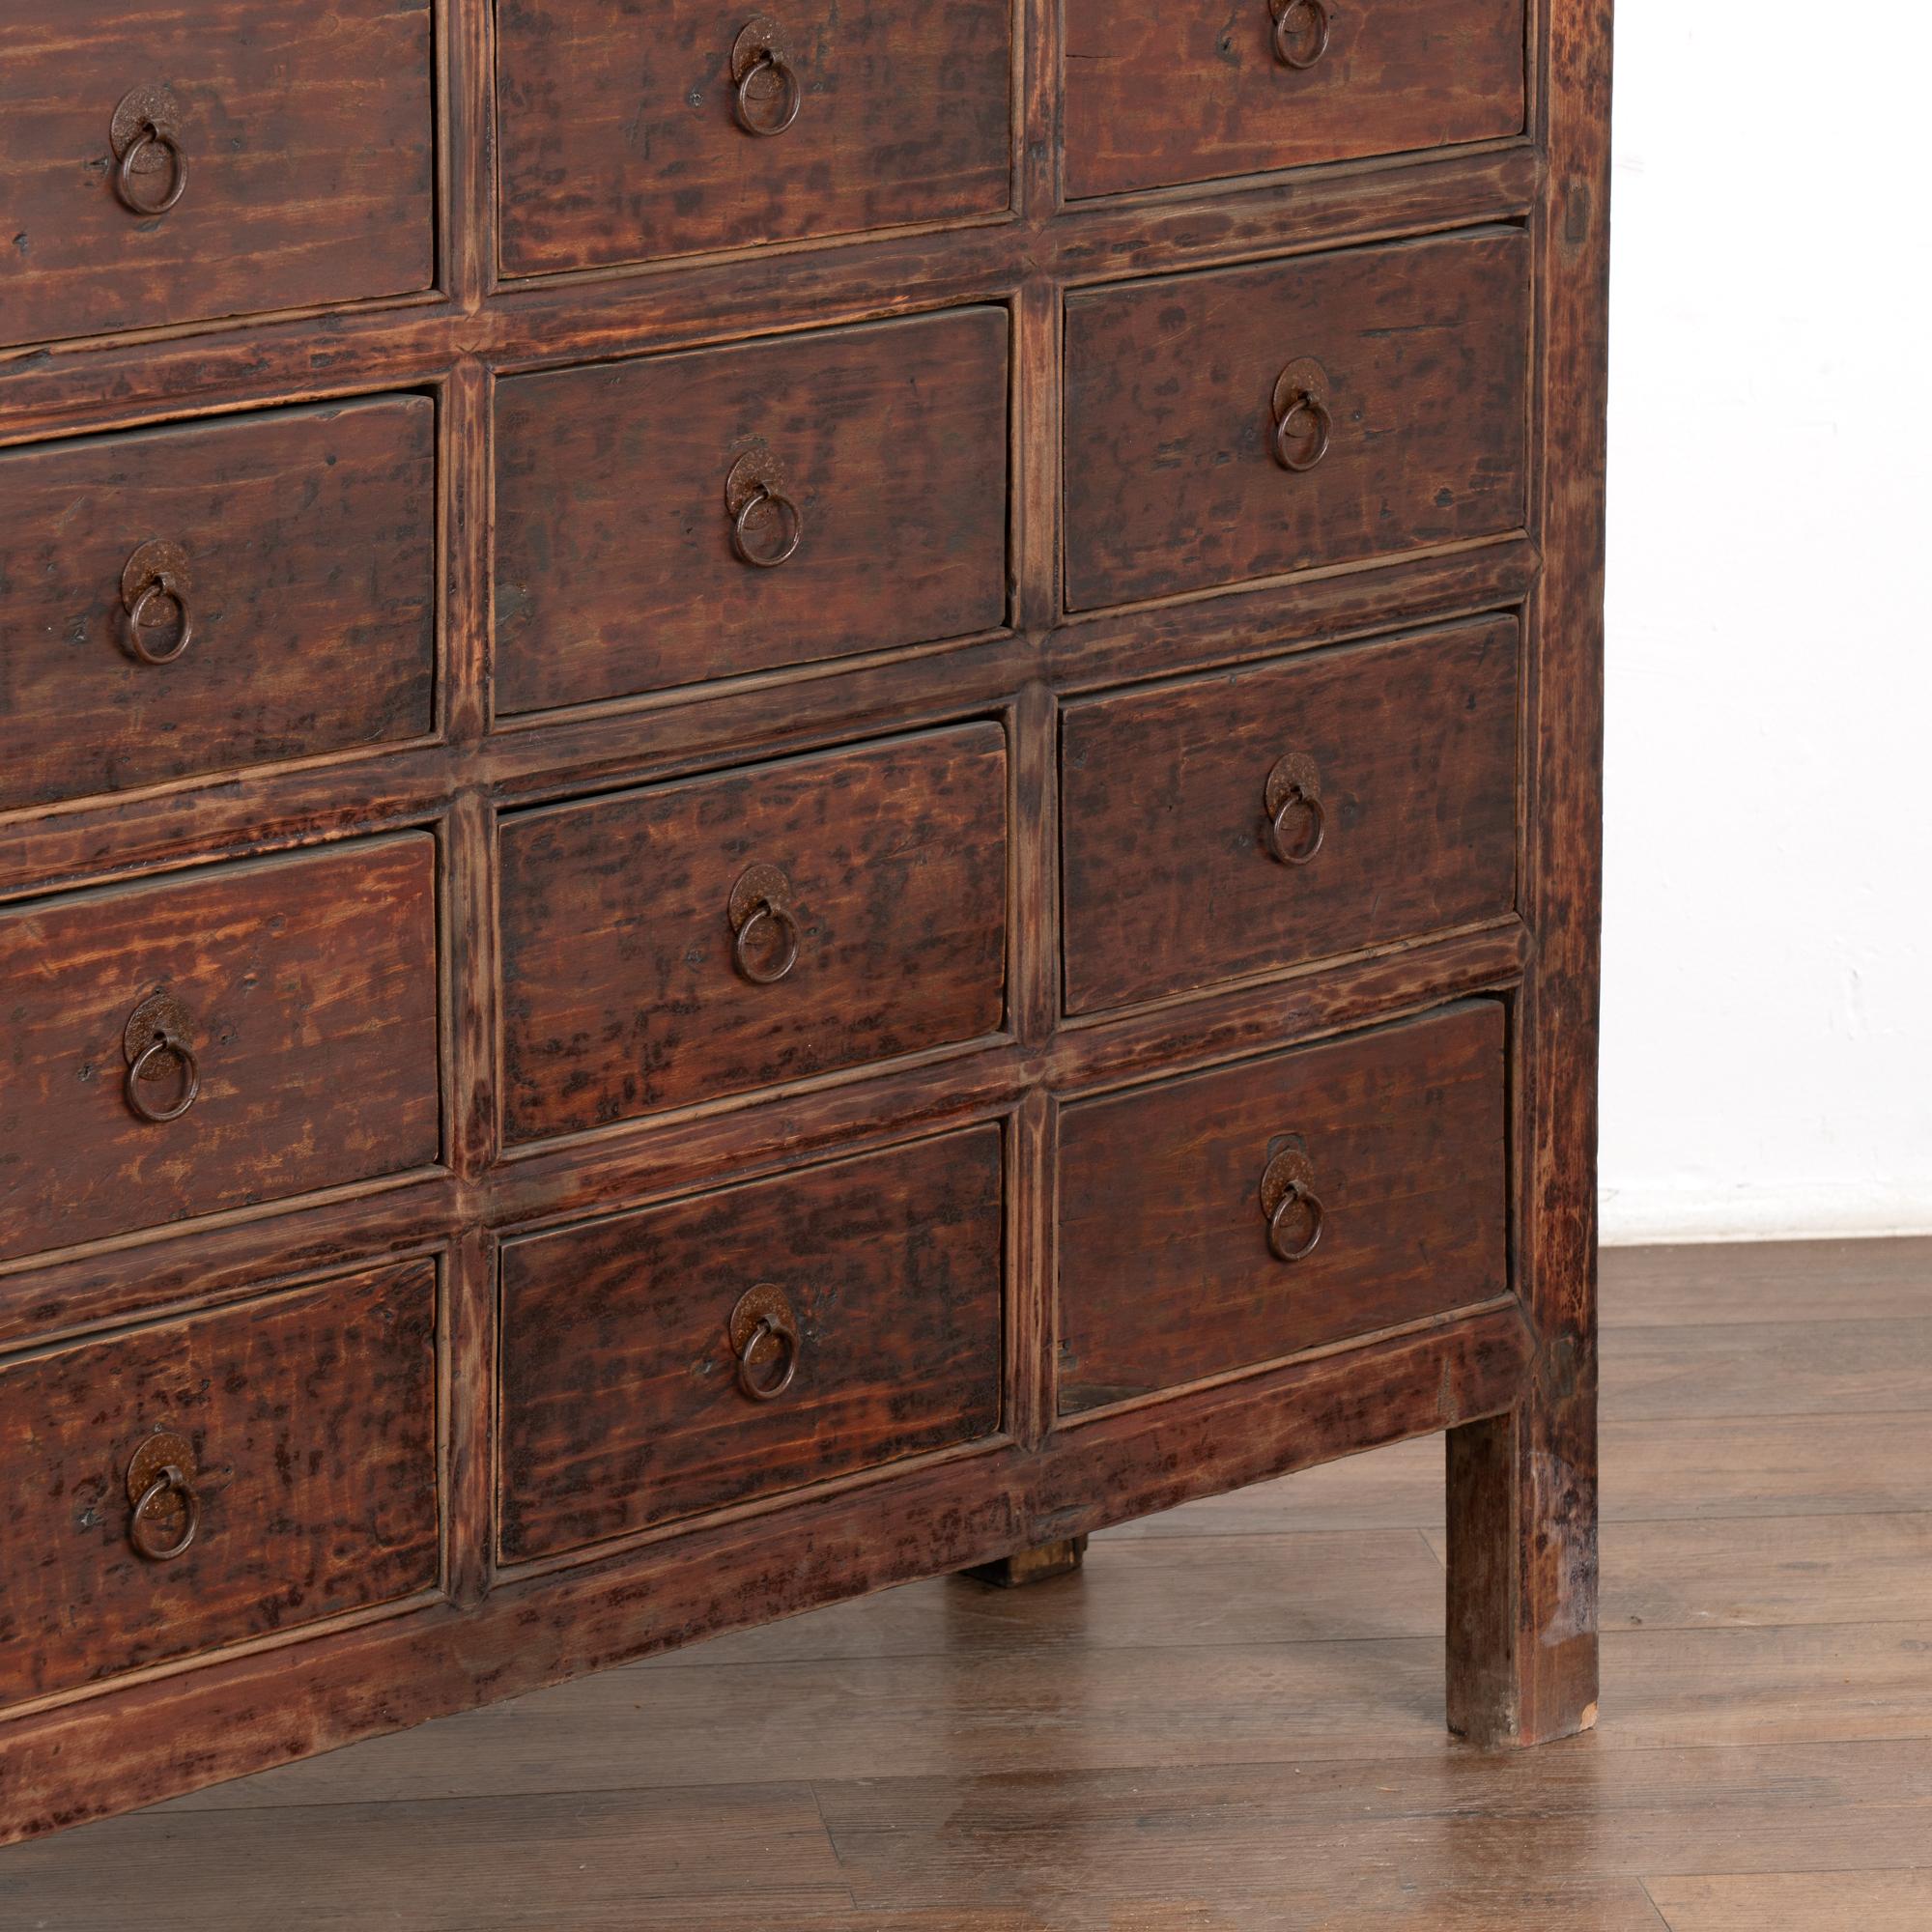 Chinese Apothecary Chest of 24 Drawers, circa 1820-40 For Sale 2